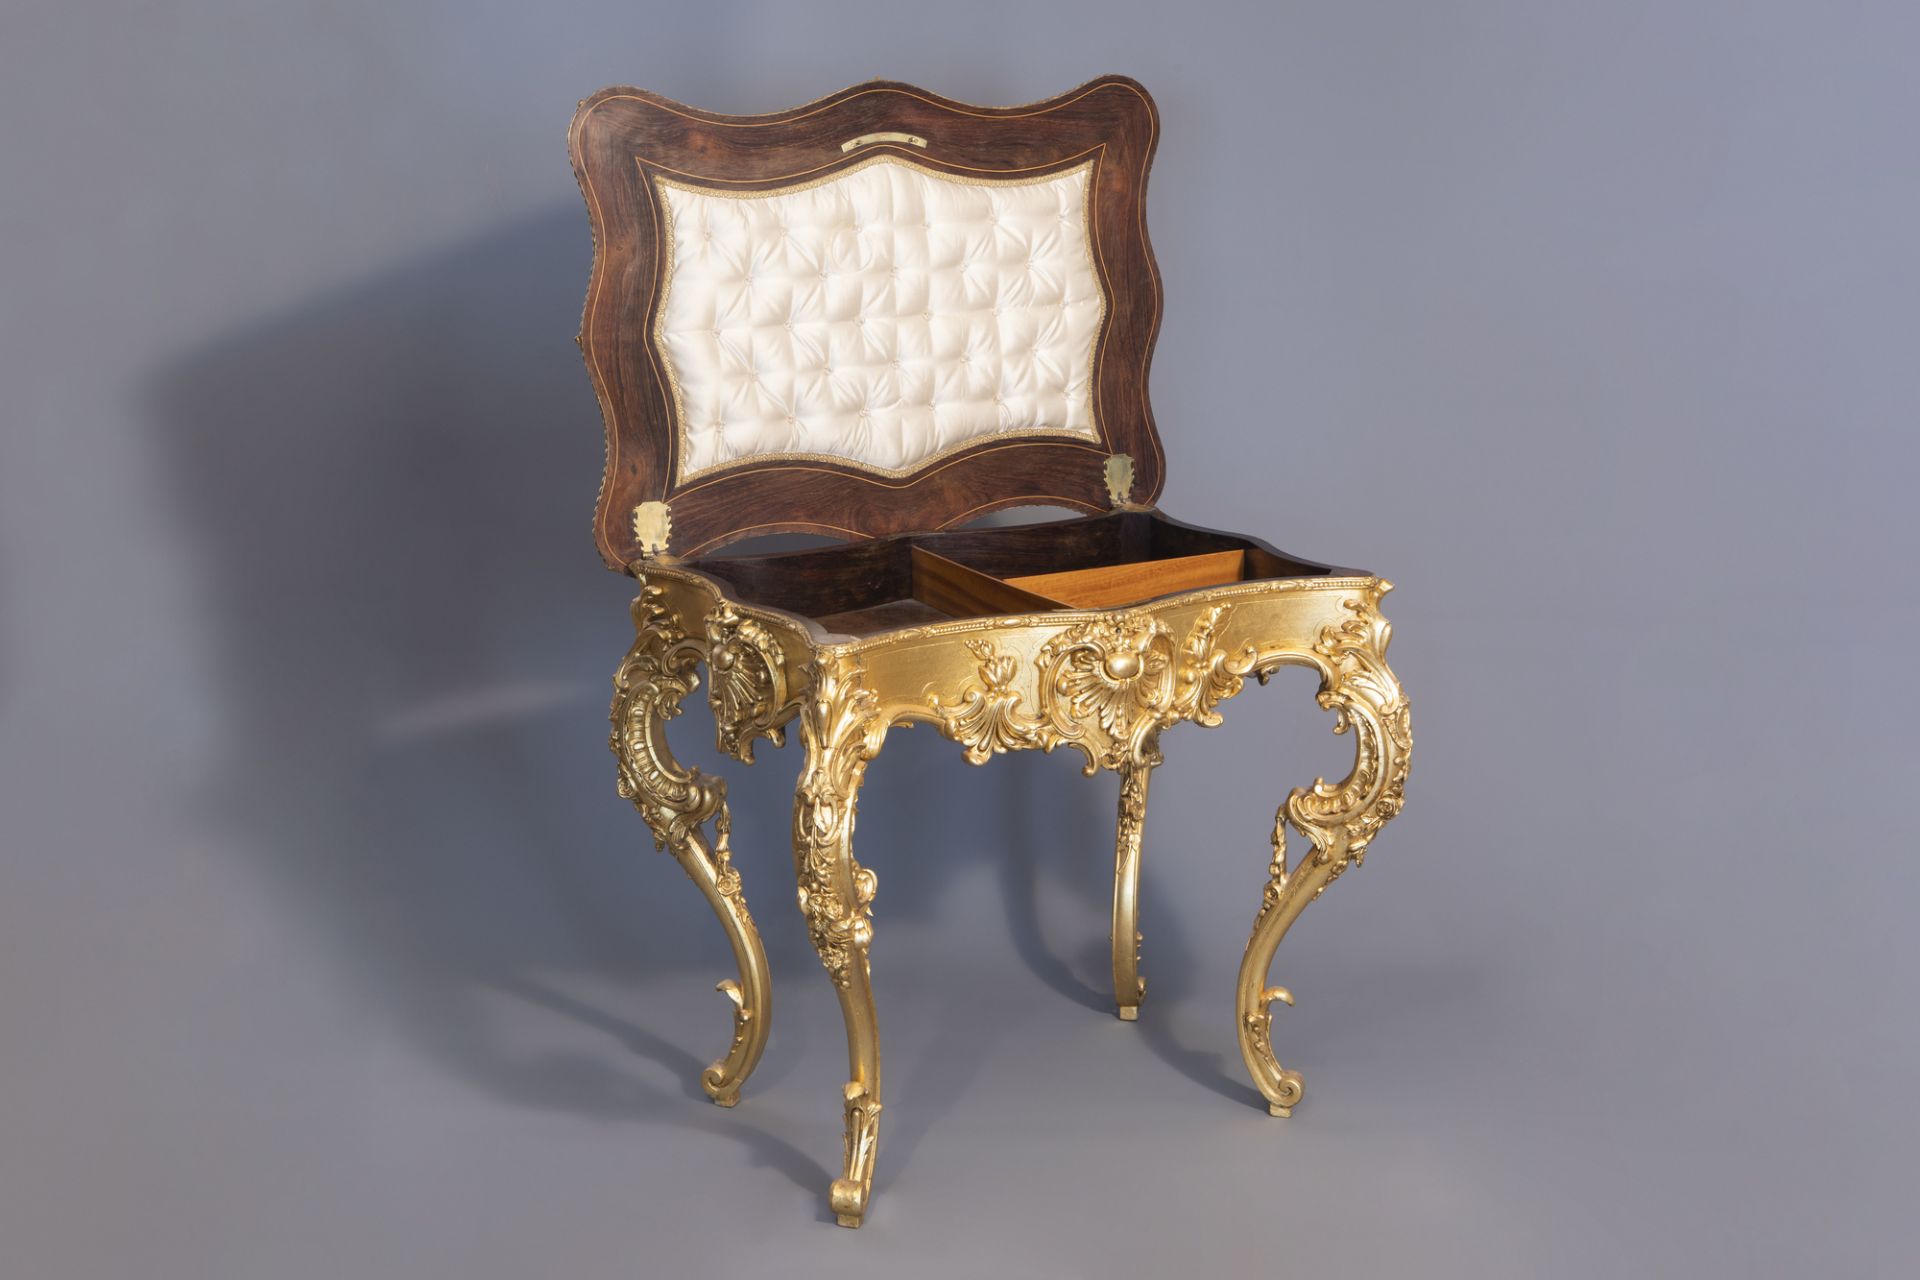 A lavish gilt Louis XV style coiffeuse with rosewood veneer inside, 19th C.